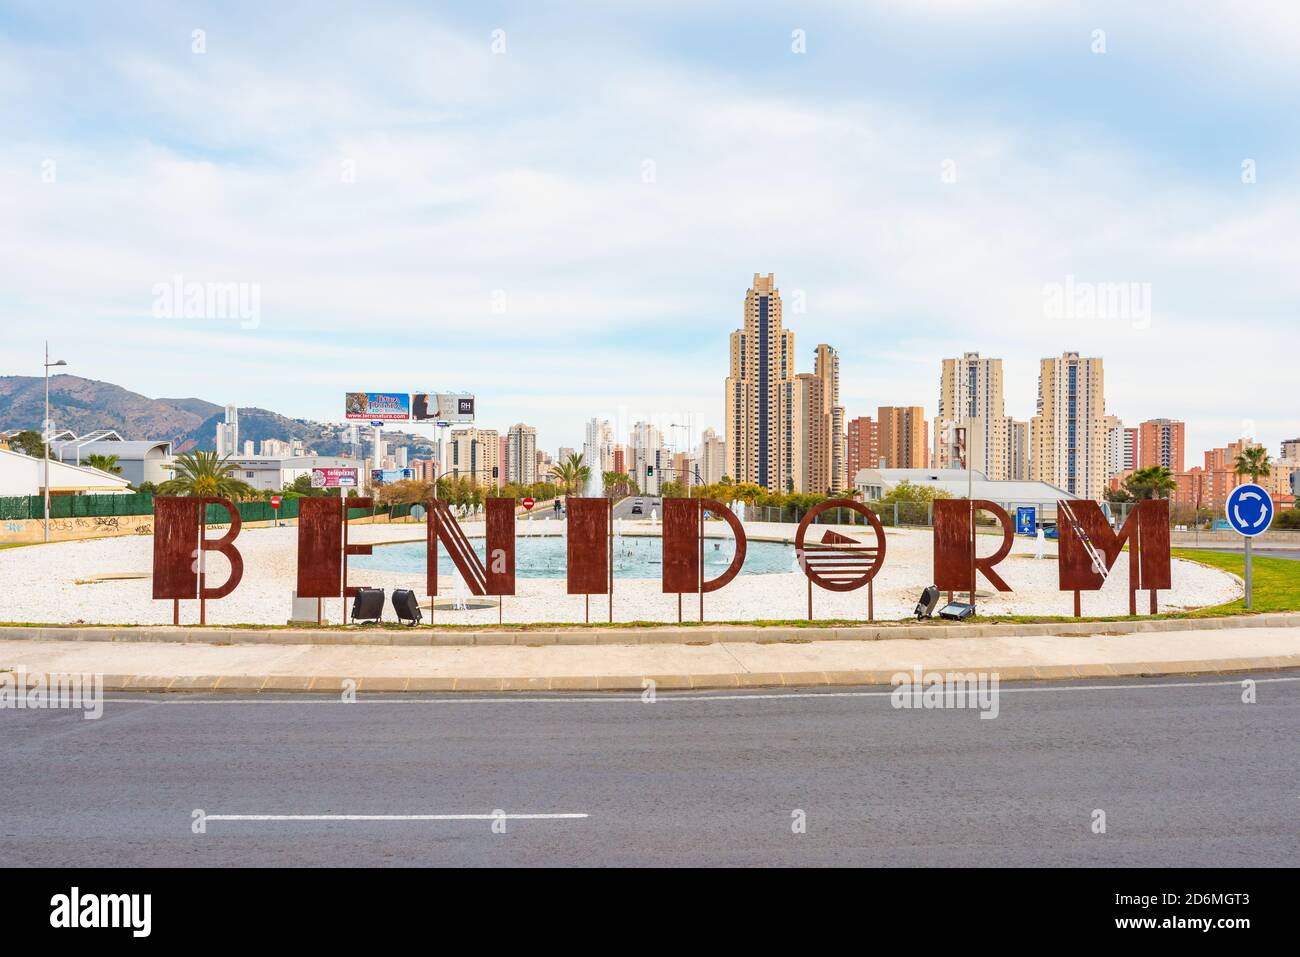 Benidorm letters on a roundabout in Benidorm, Spain. Benidorm attracts many tourists because of the very mild winters and hot summers. Stock Photo